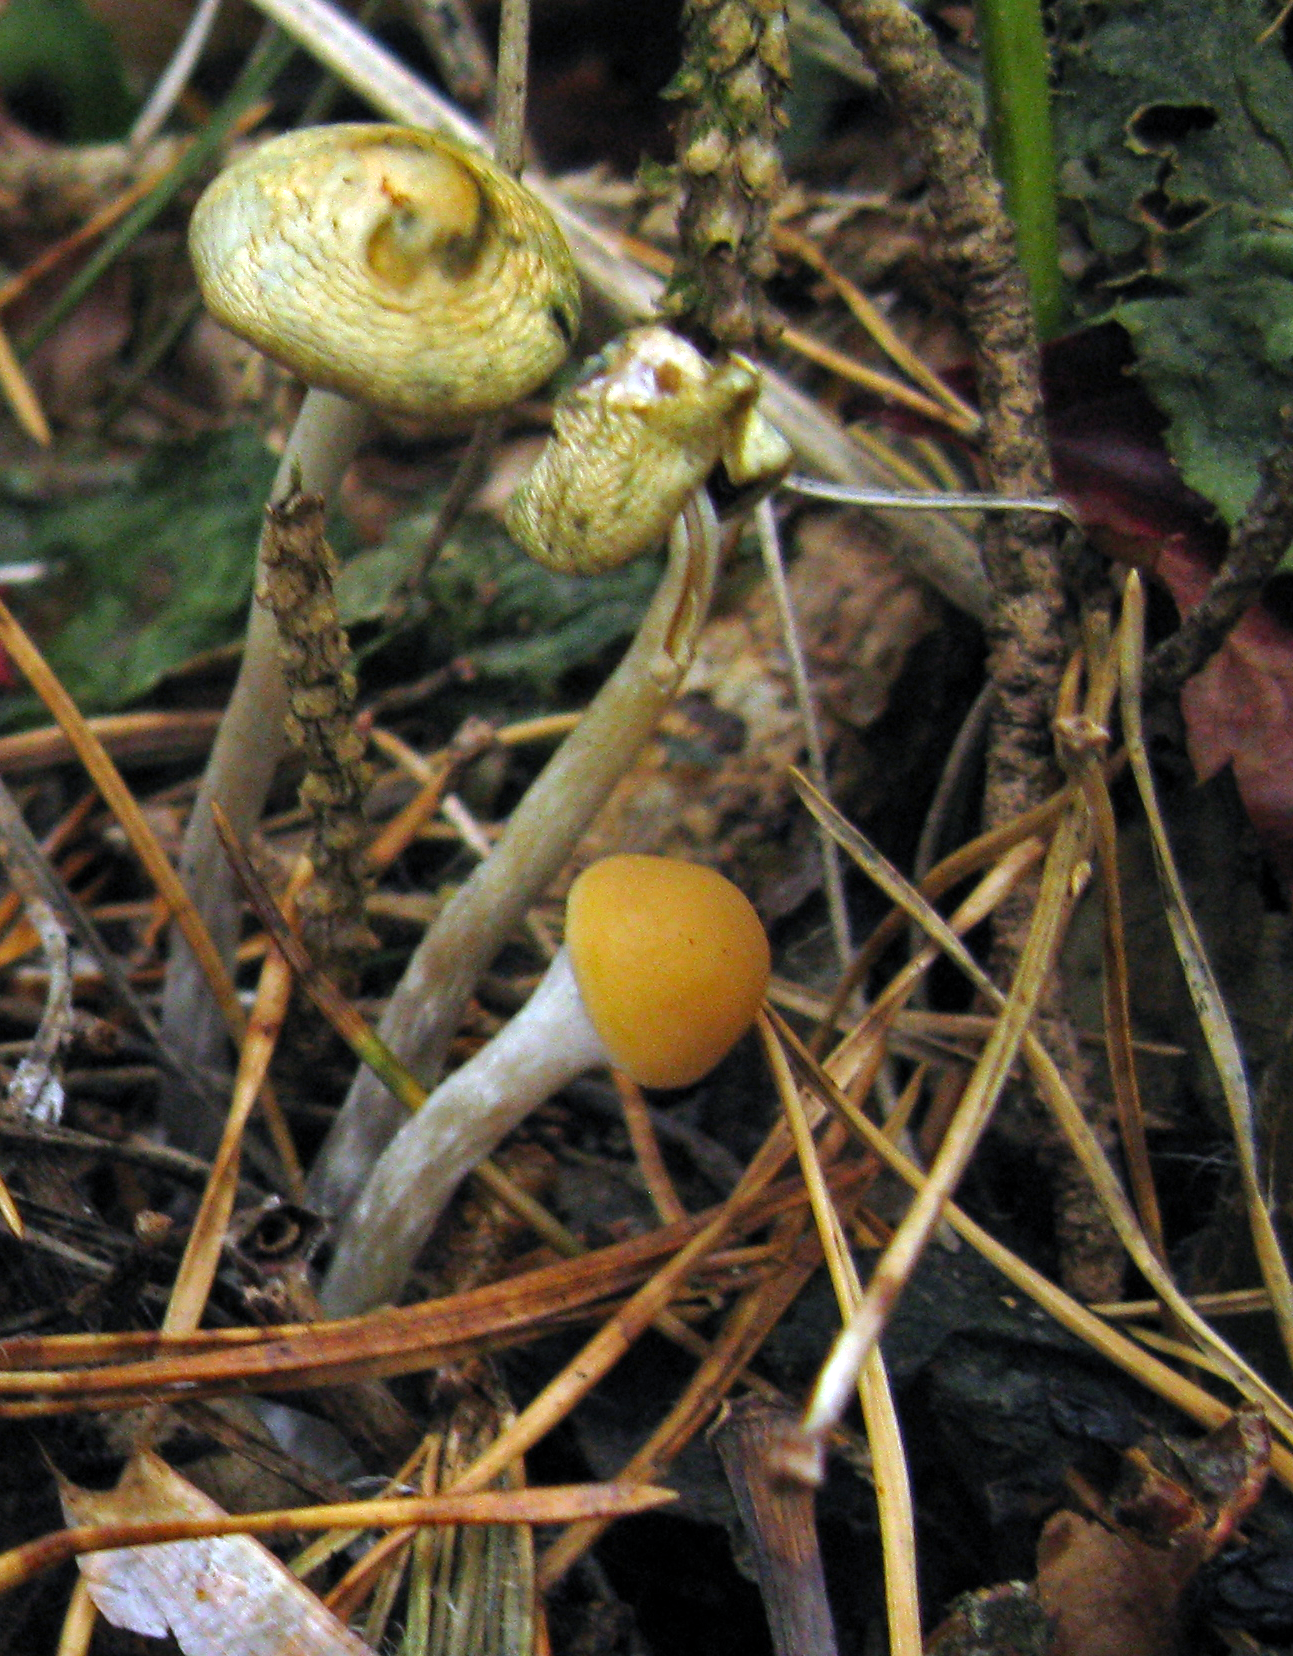 Young and aged carpophores of Psilocybe serbica. Note the blueing of the mature specimens which indicates psilocybin breakdown. Photo credit: Matthias Gube.